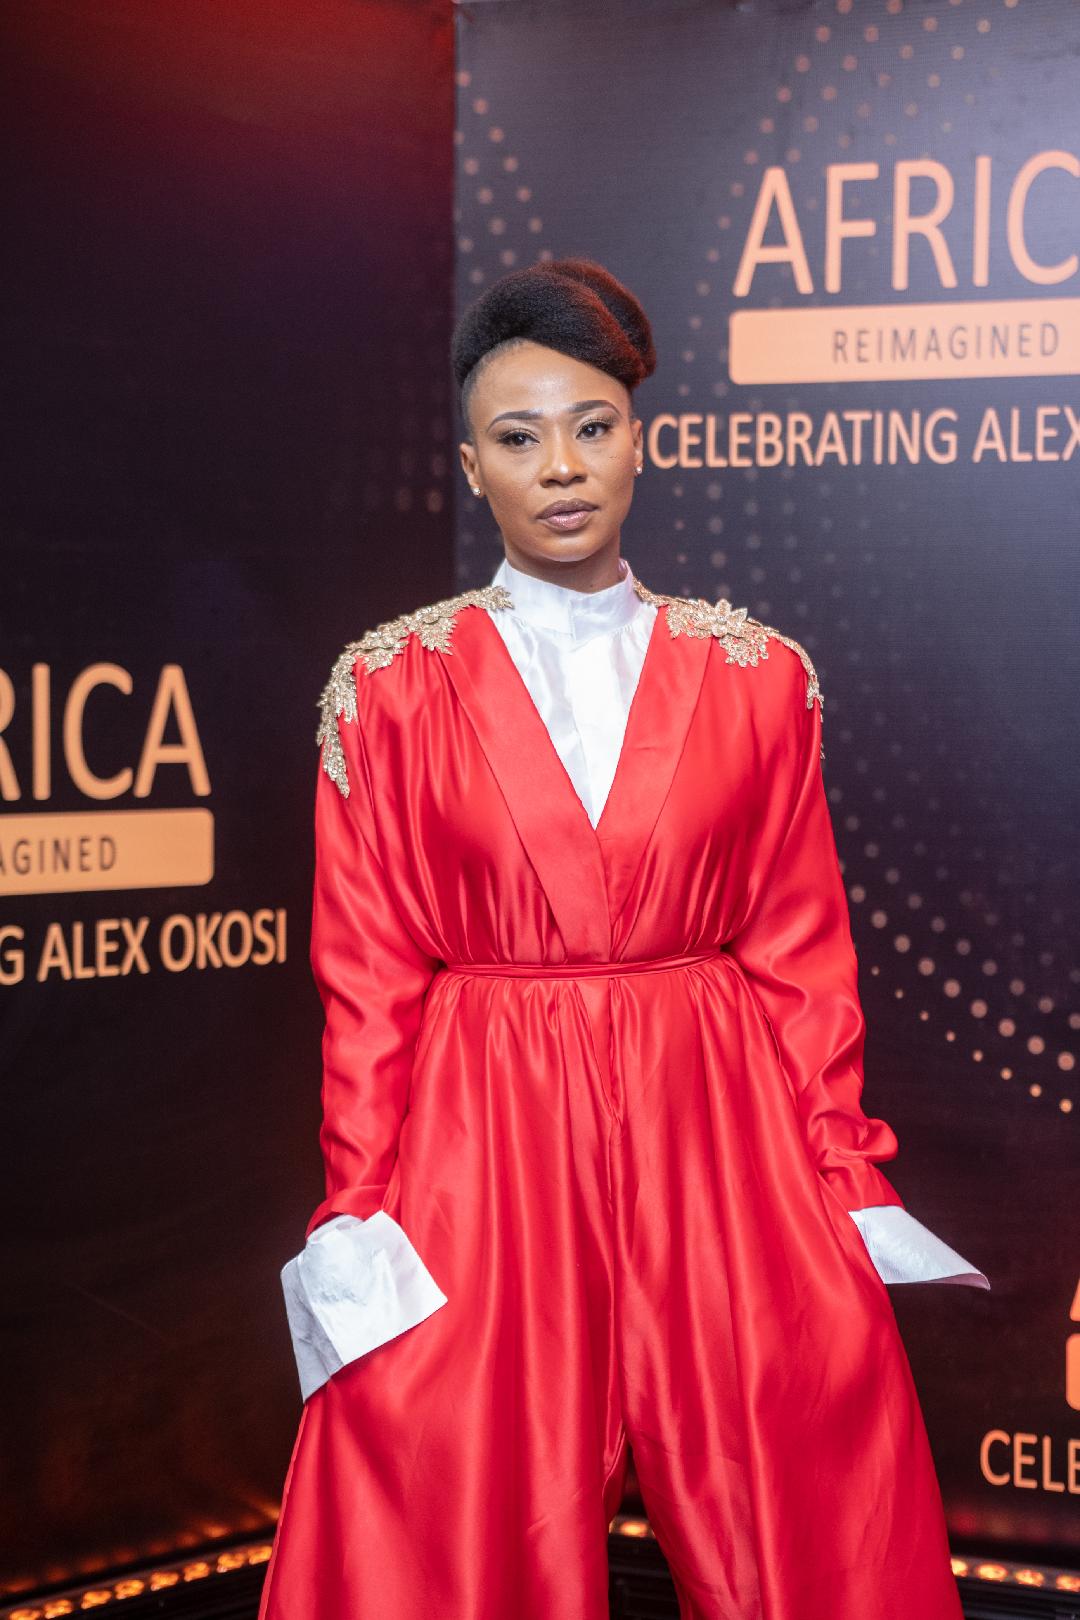 Actress Nse Ikpe-Etim Steps Out In Style For Alex Okosi’s Party